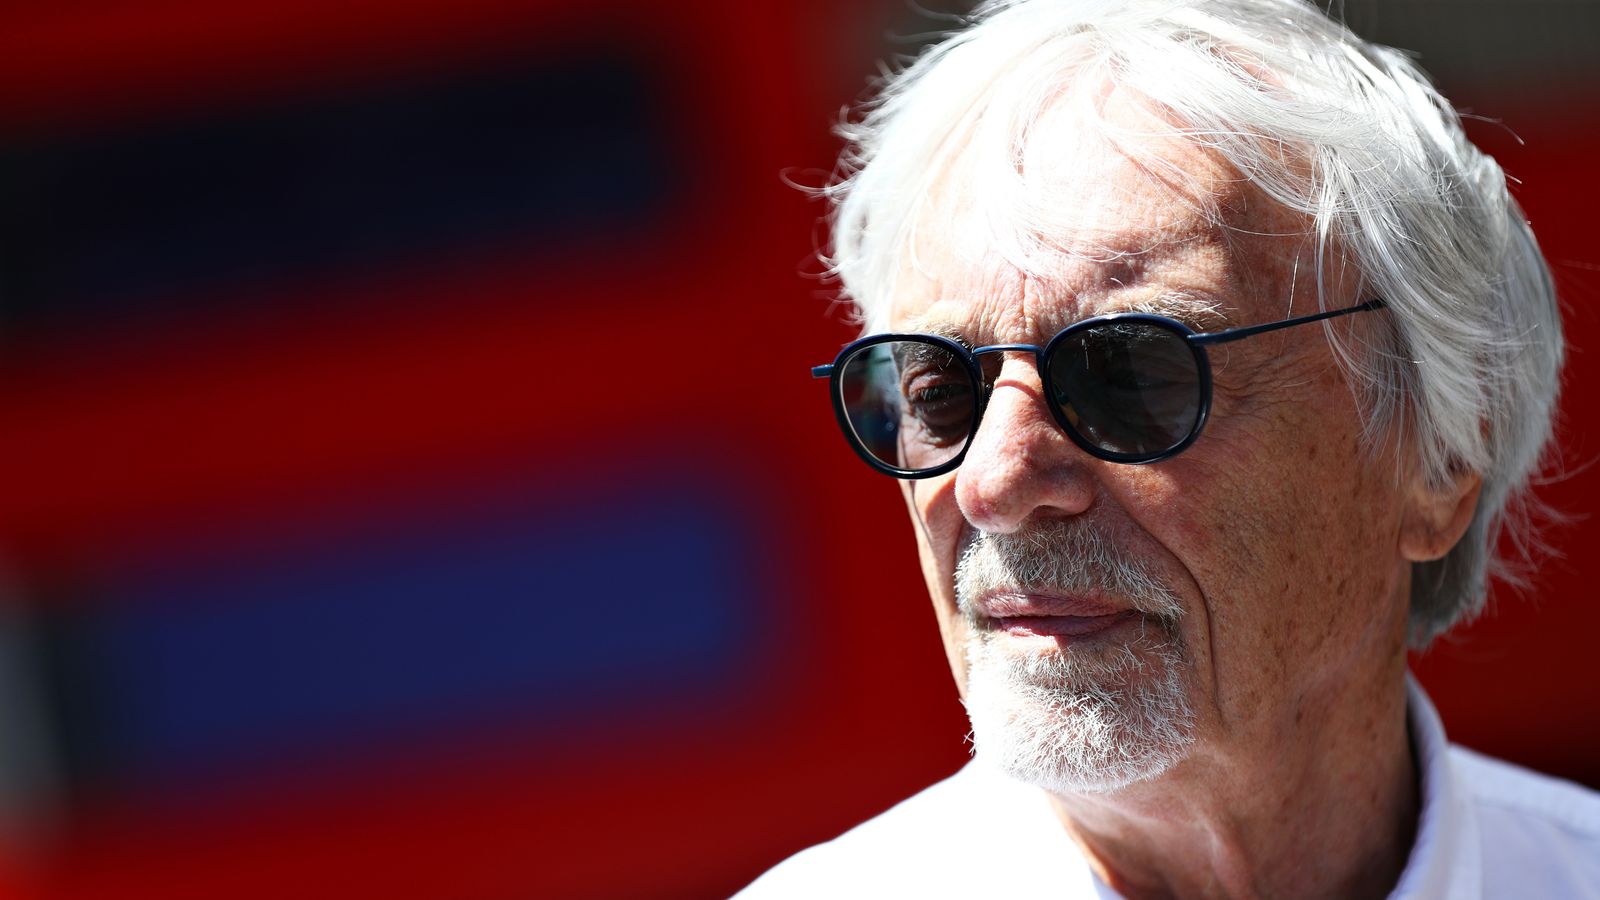 Bernie Ecclestone: Former F1 CEO arrested in Brazil for illegally carrying a gun